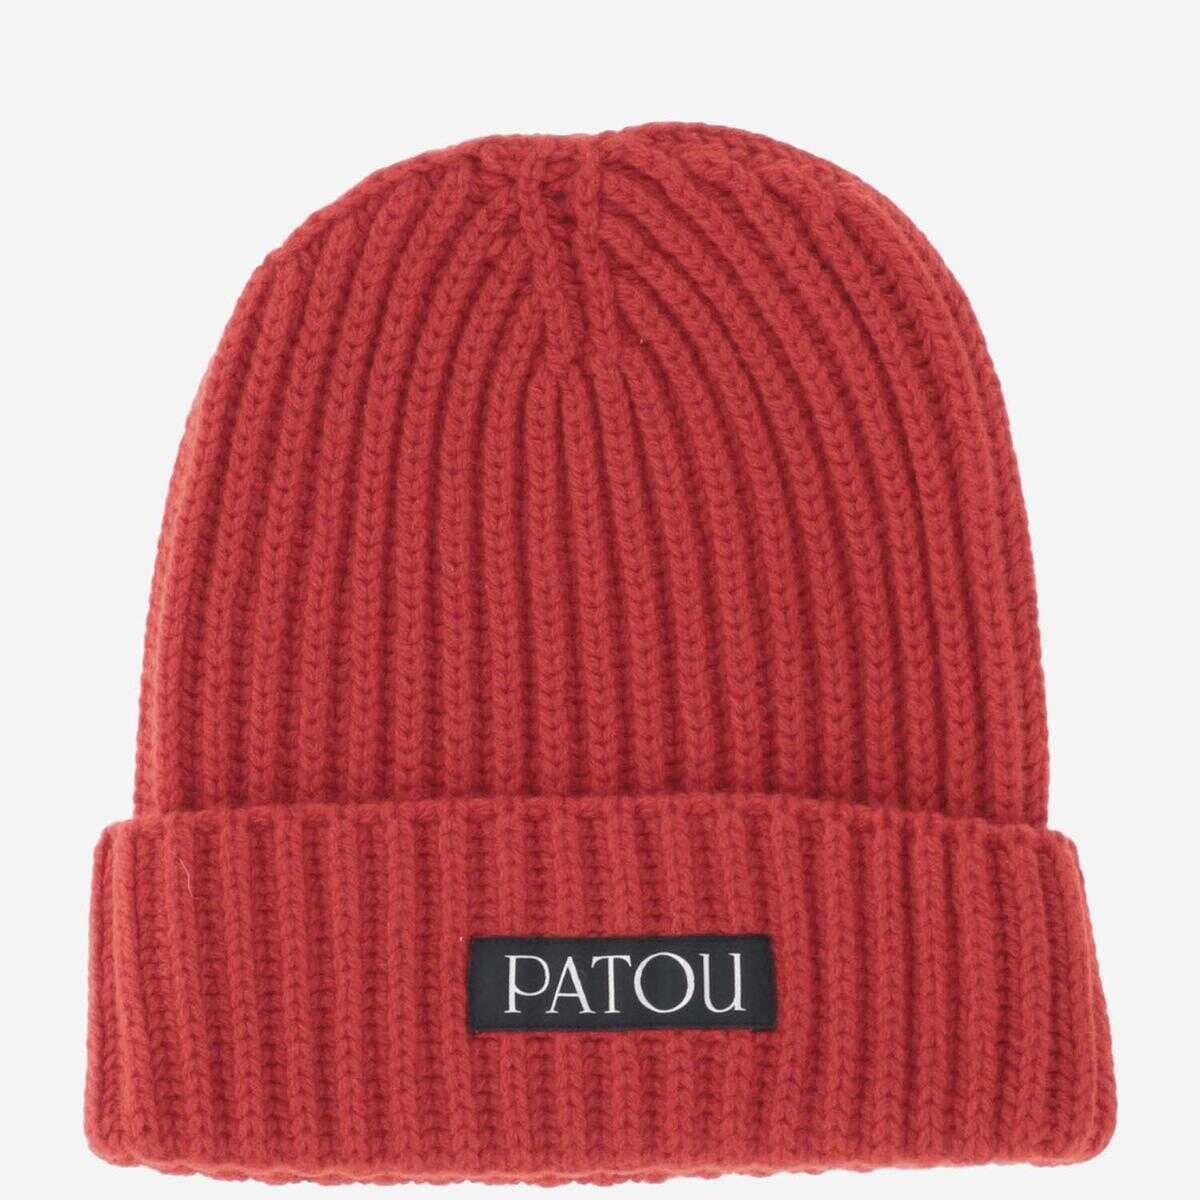 Patou PATOU CASHMERE AND WOOL BEANIE WITH LOGO ROSSO